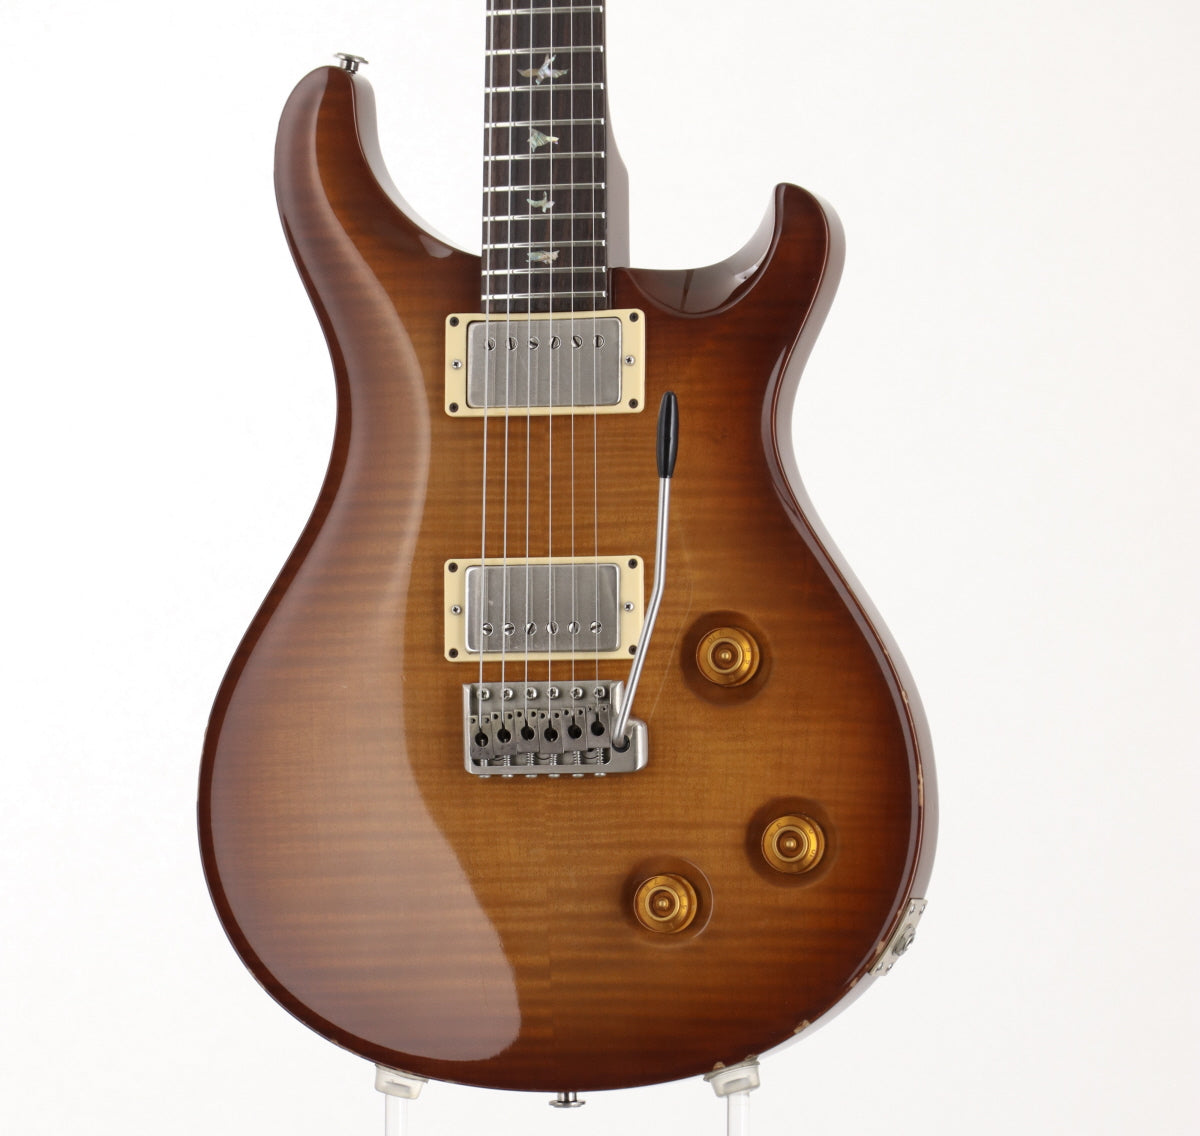 [SN 4 87443] USED Paul Reed Smith (PRS) / 2004 Custom 22 1st 10Top Violin Amber Burst Wide Fat Neck [03]